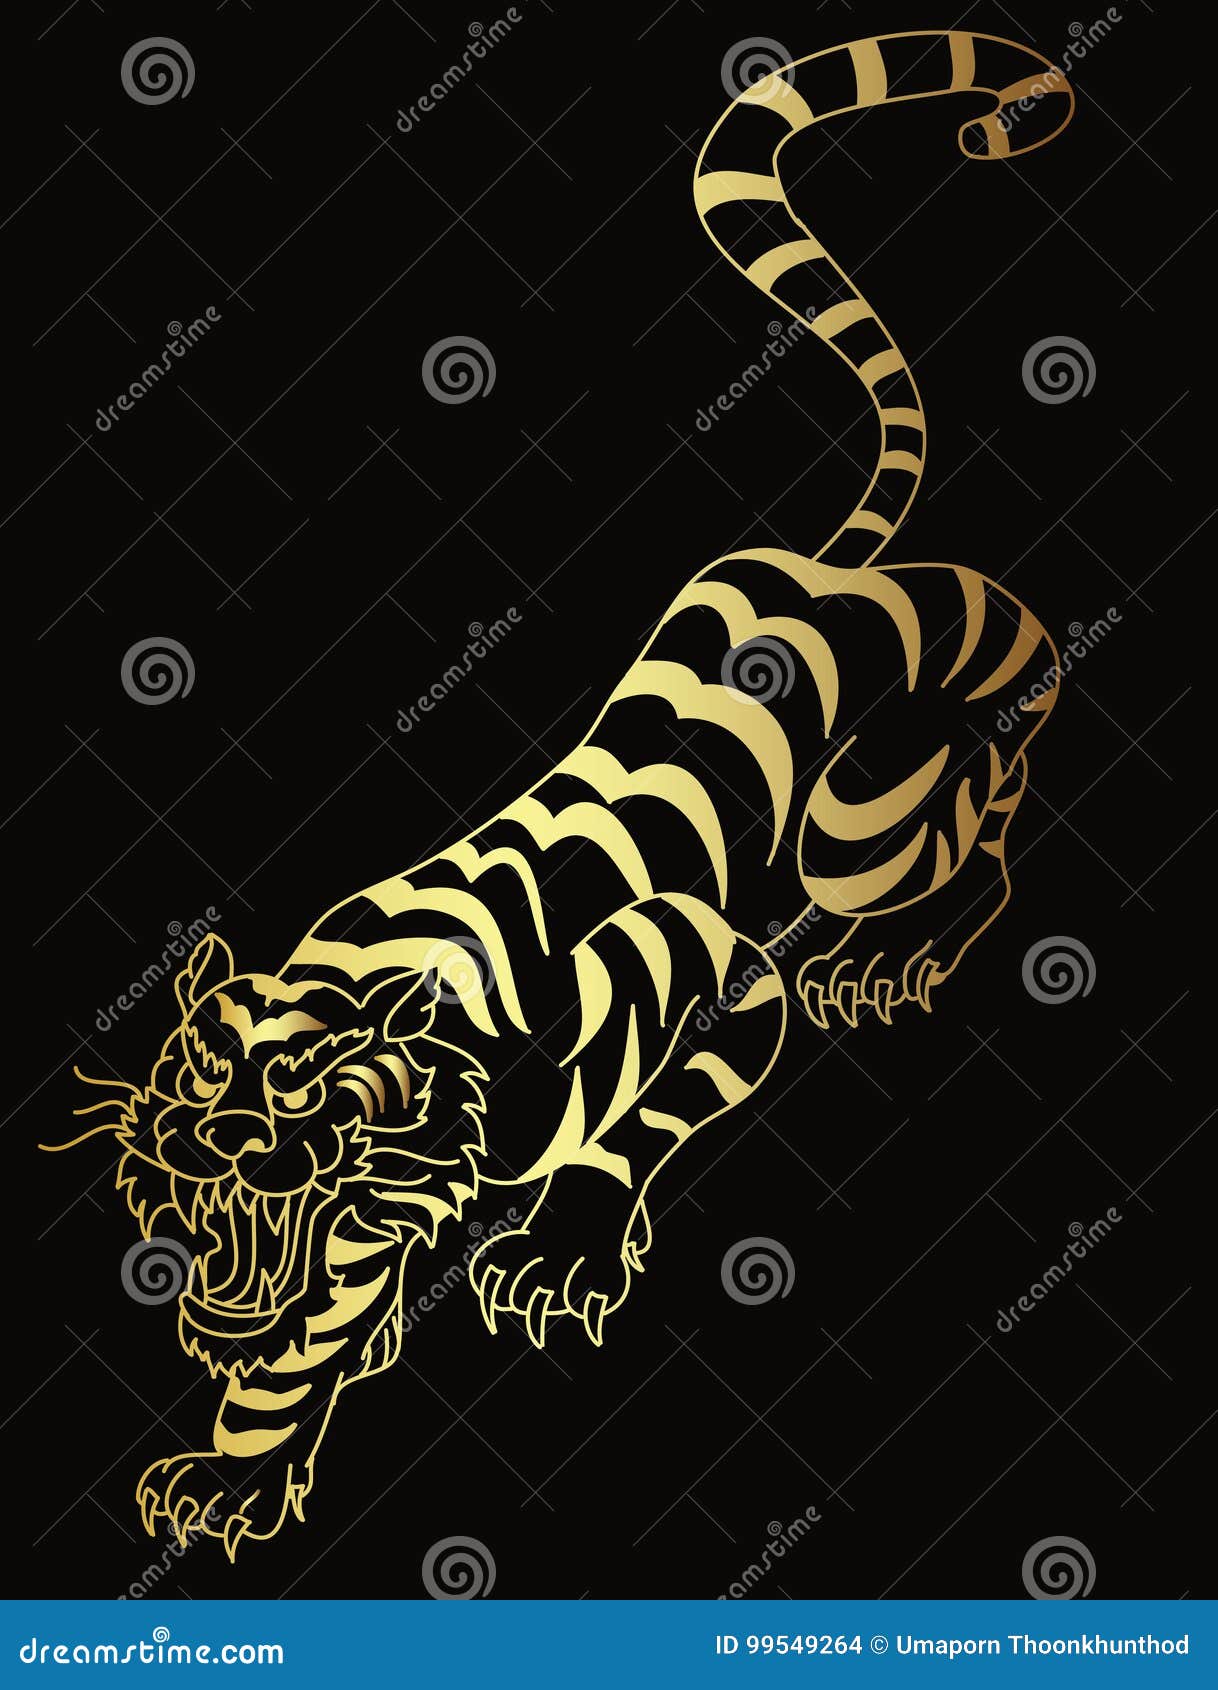 Tiger black old scholl tattoo Royalty Free Vector Image